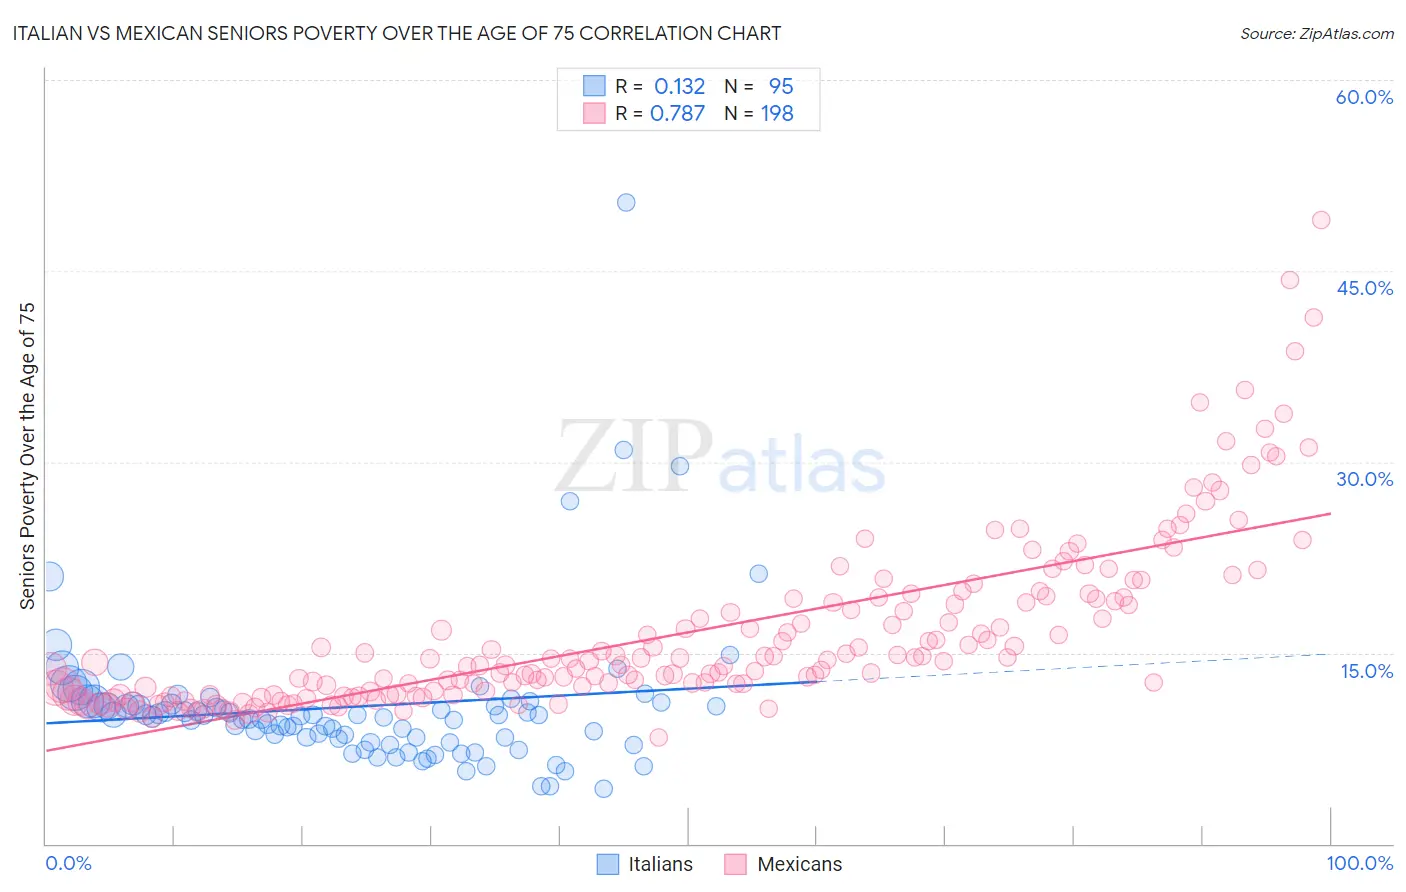 Italian vs Mexican Seniors Poverty Over the Age of 75